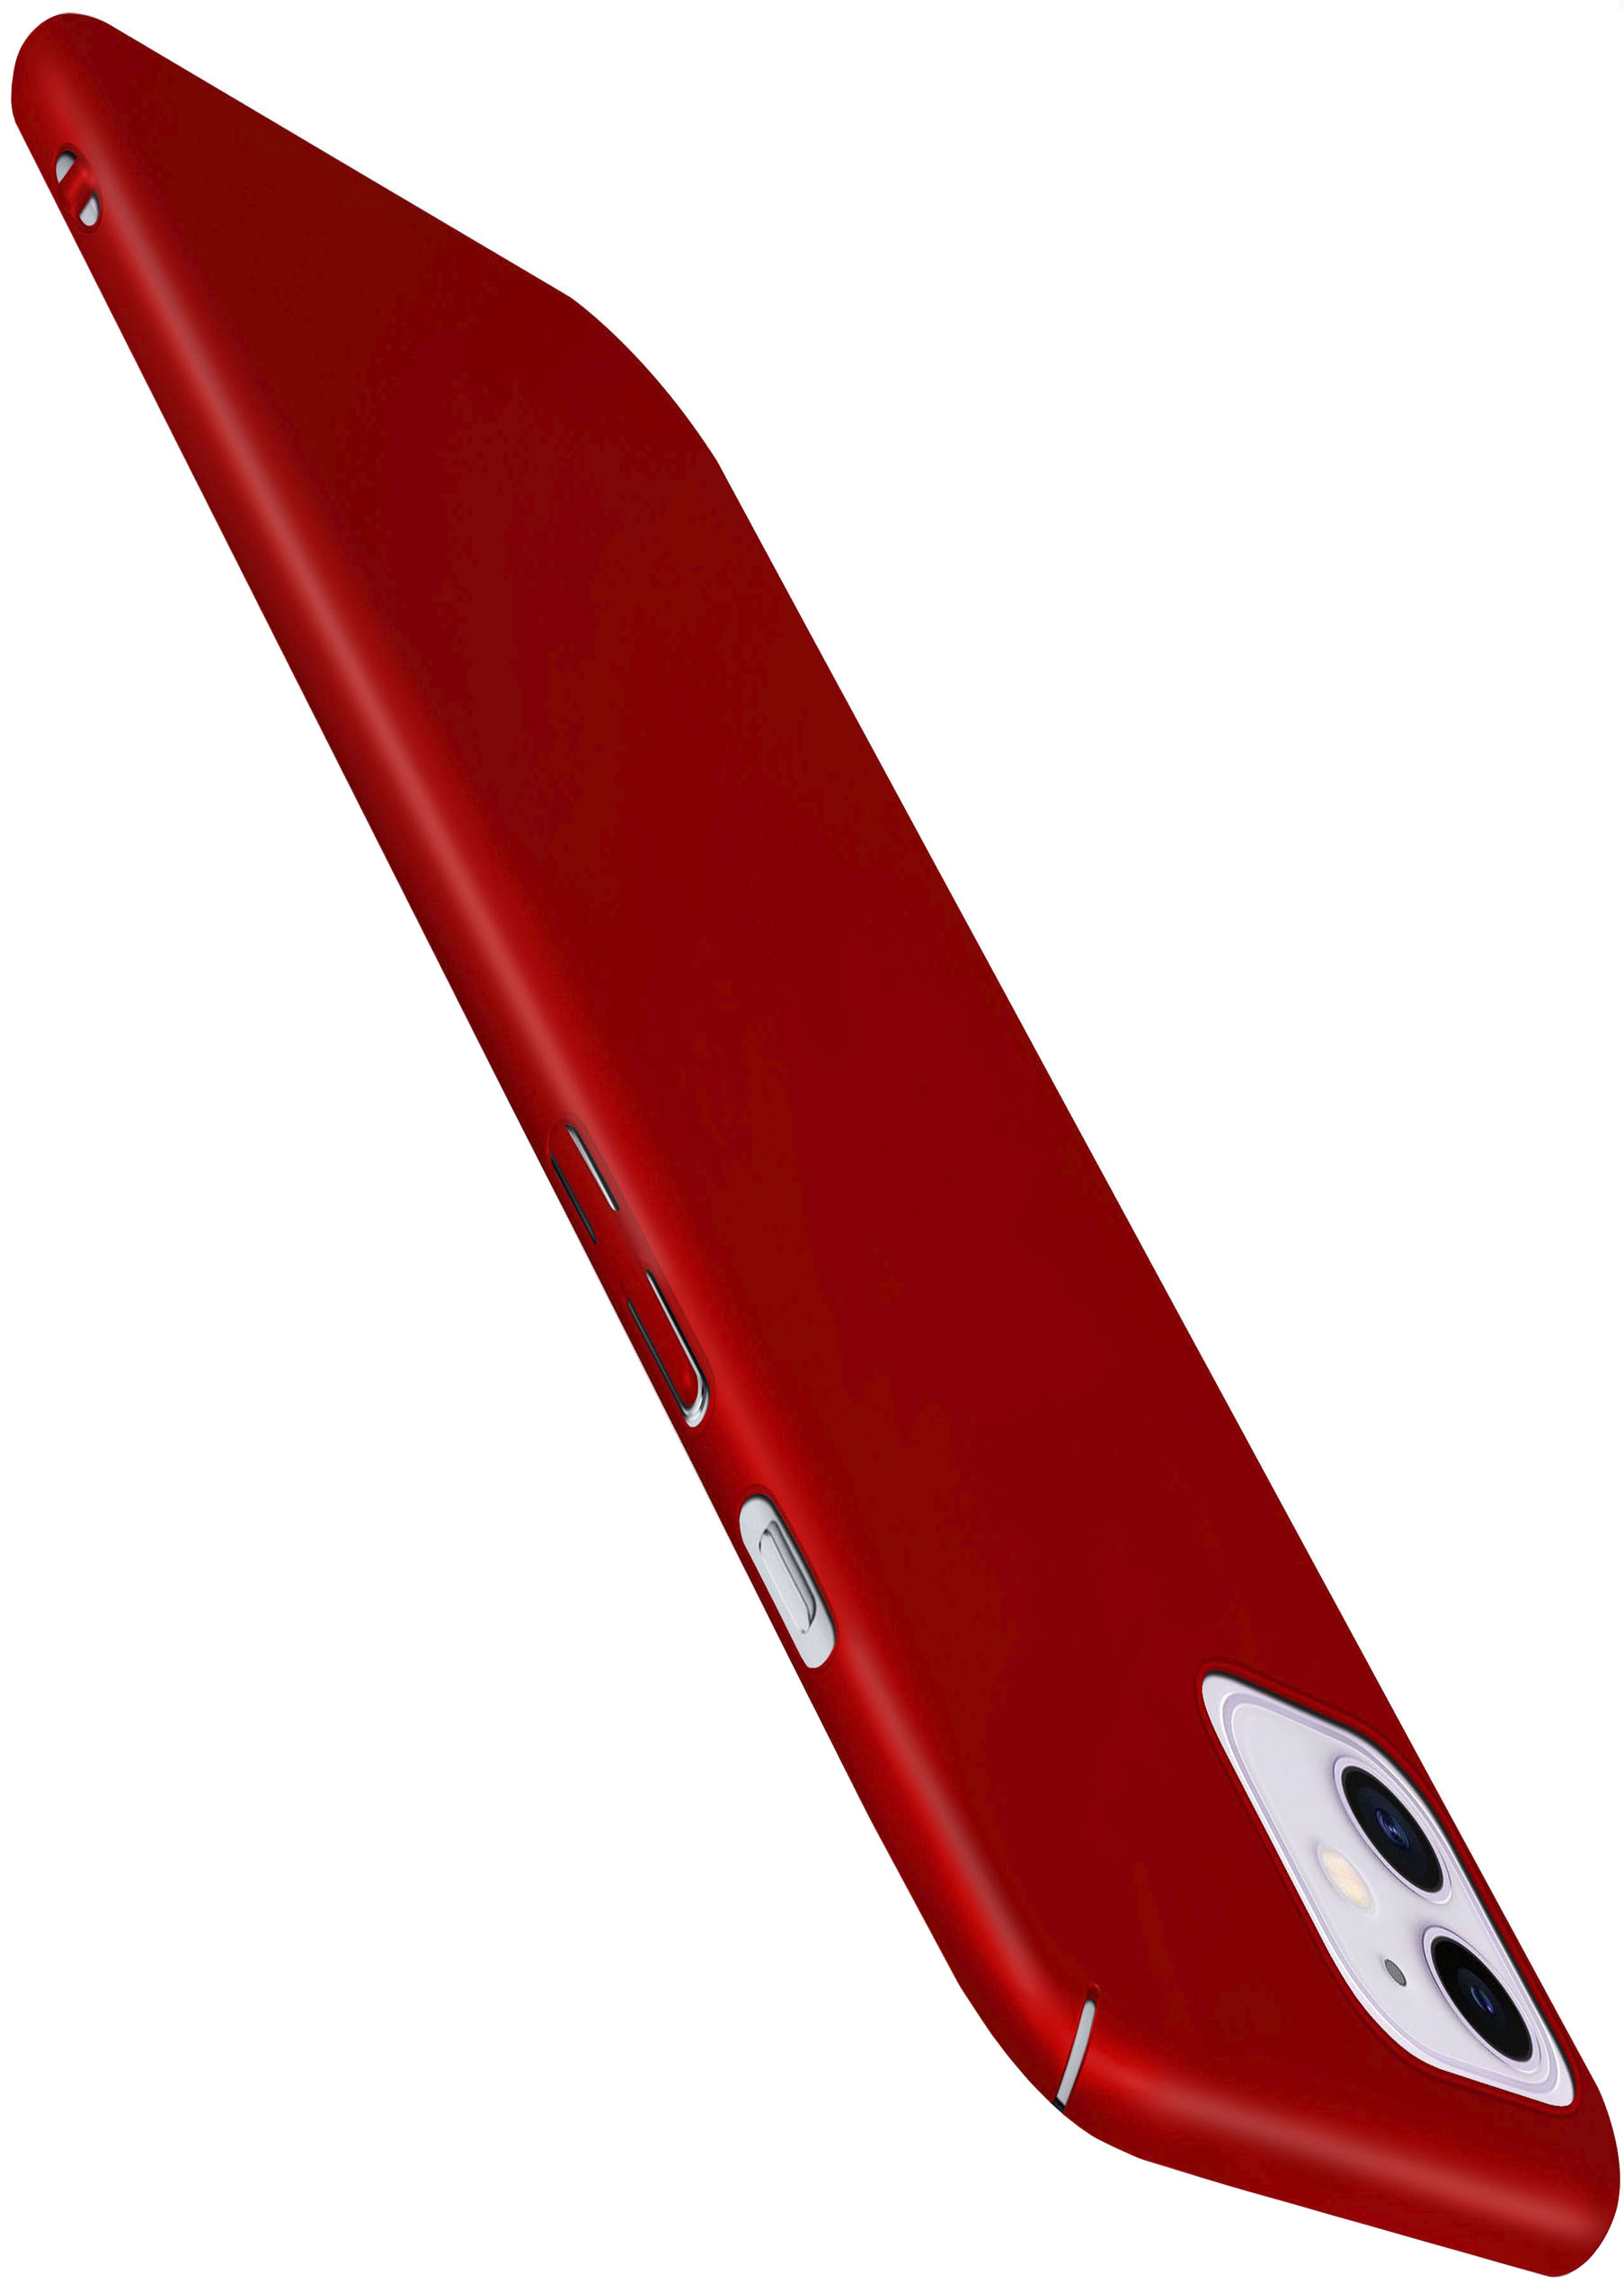 MOEX Alpha iPhone 12, Rot Case, Backcover, Apple